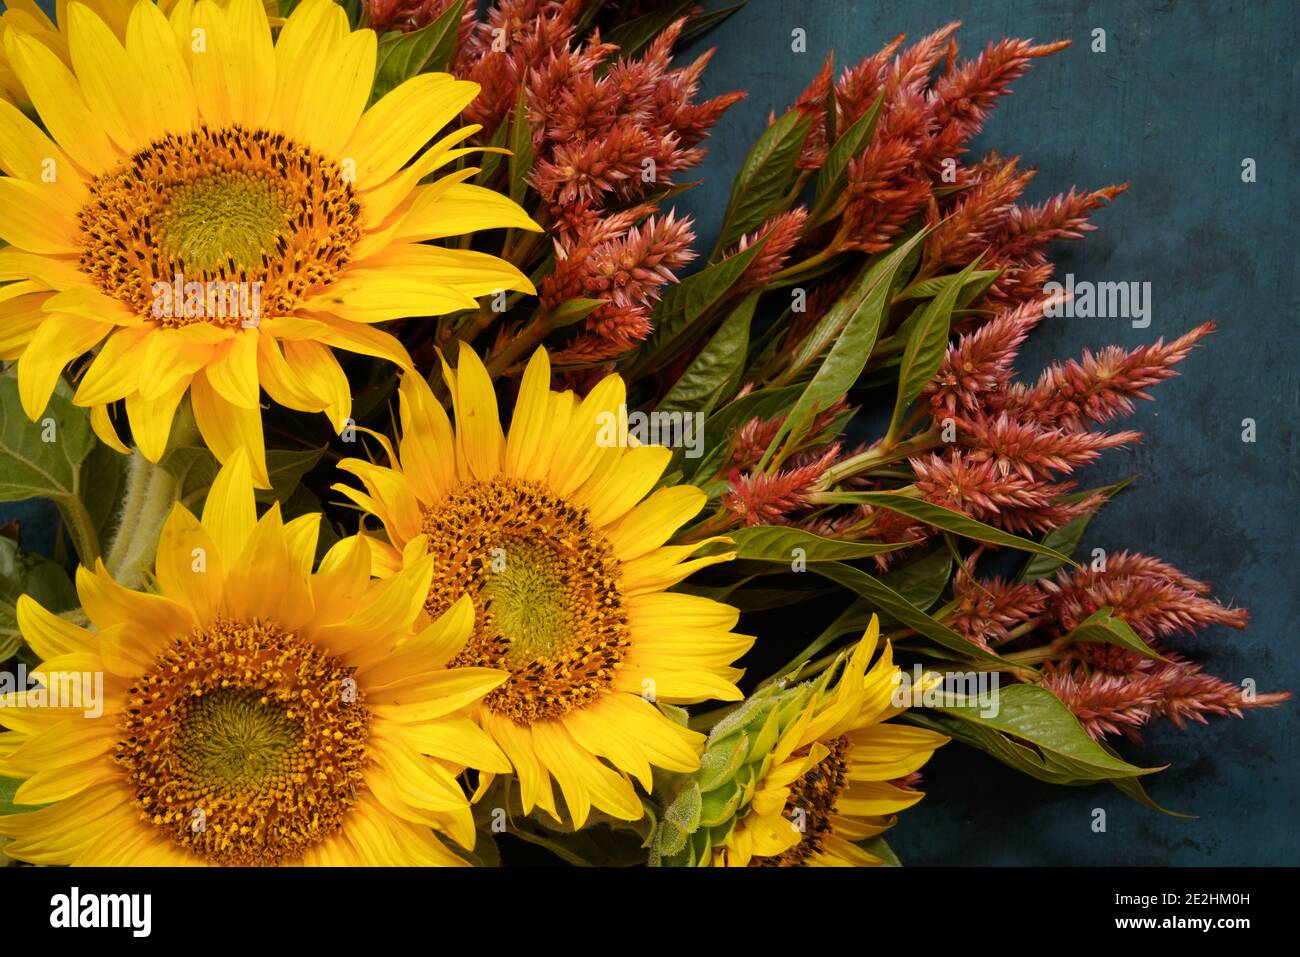 Cut flower bouquet containing sunflowers and Celosia var. Terracotta Stock Photo